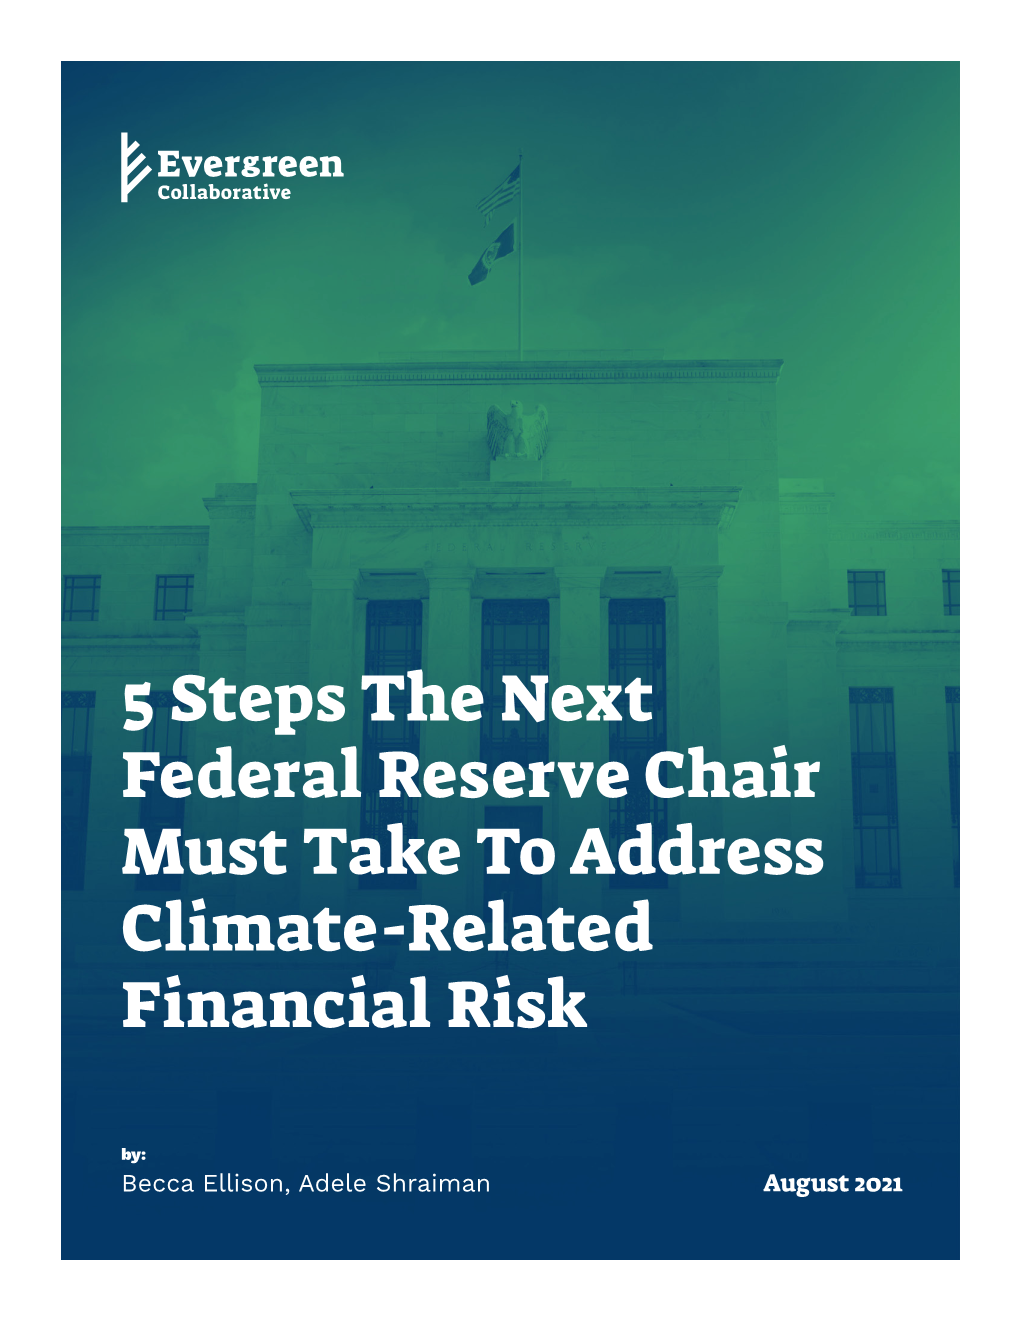 5 Steps the Next Federal Reserve Chair Must Take to Address Climate-Related Financial Risk